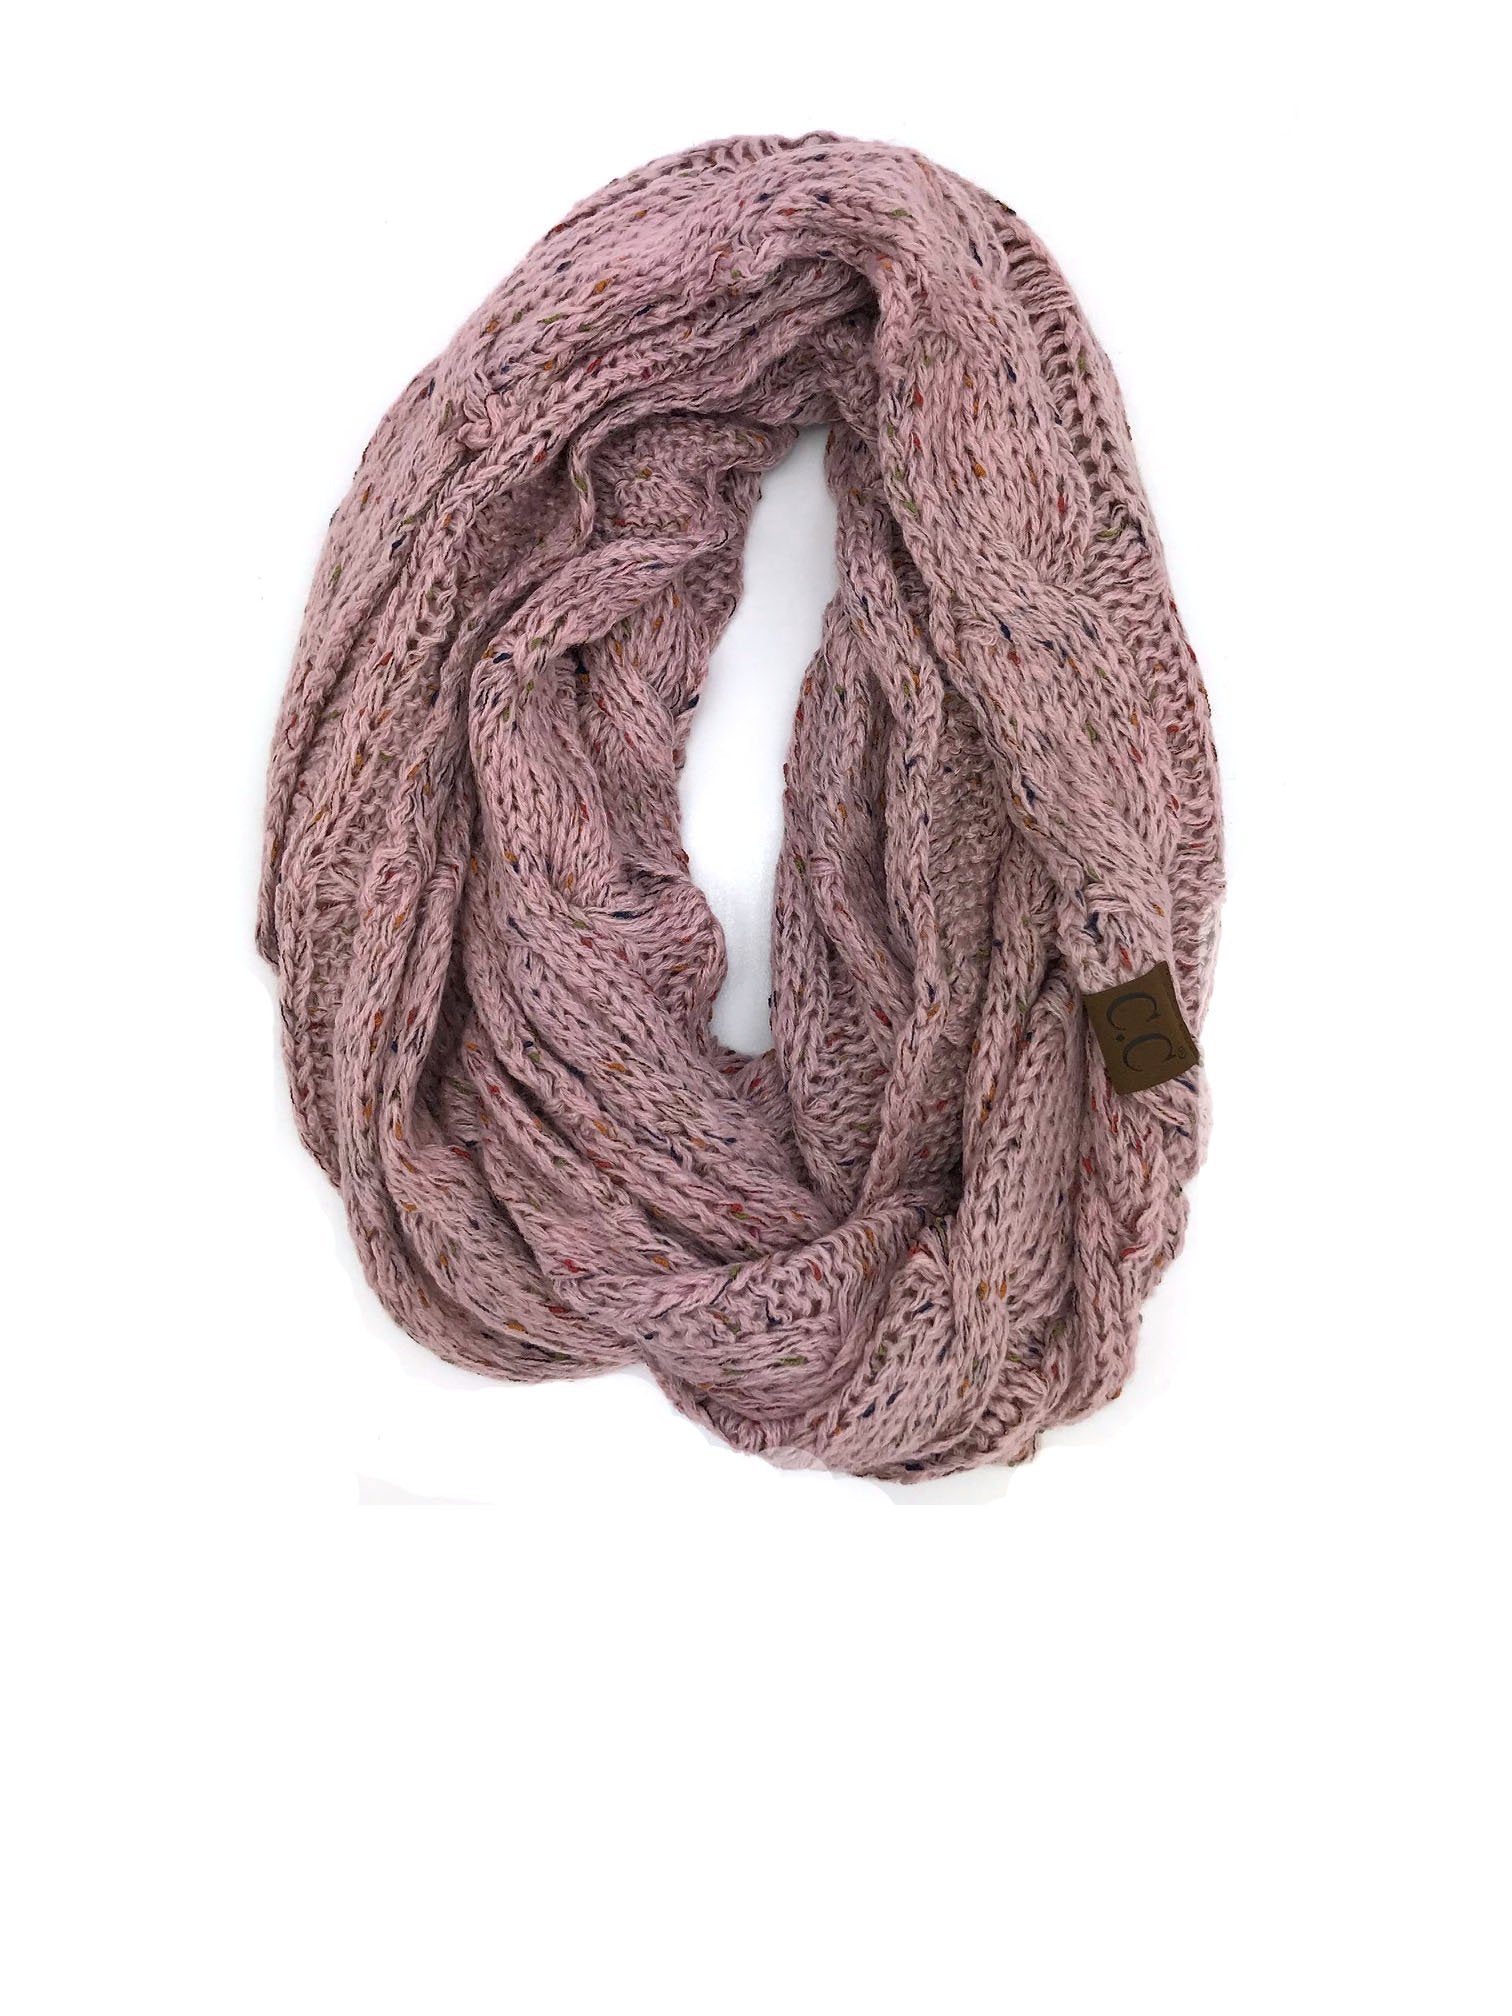 SF-33 Indi Pink Speckled Infinity Scarf